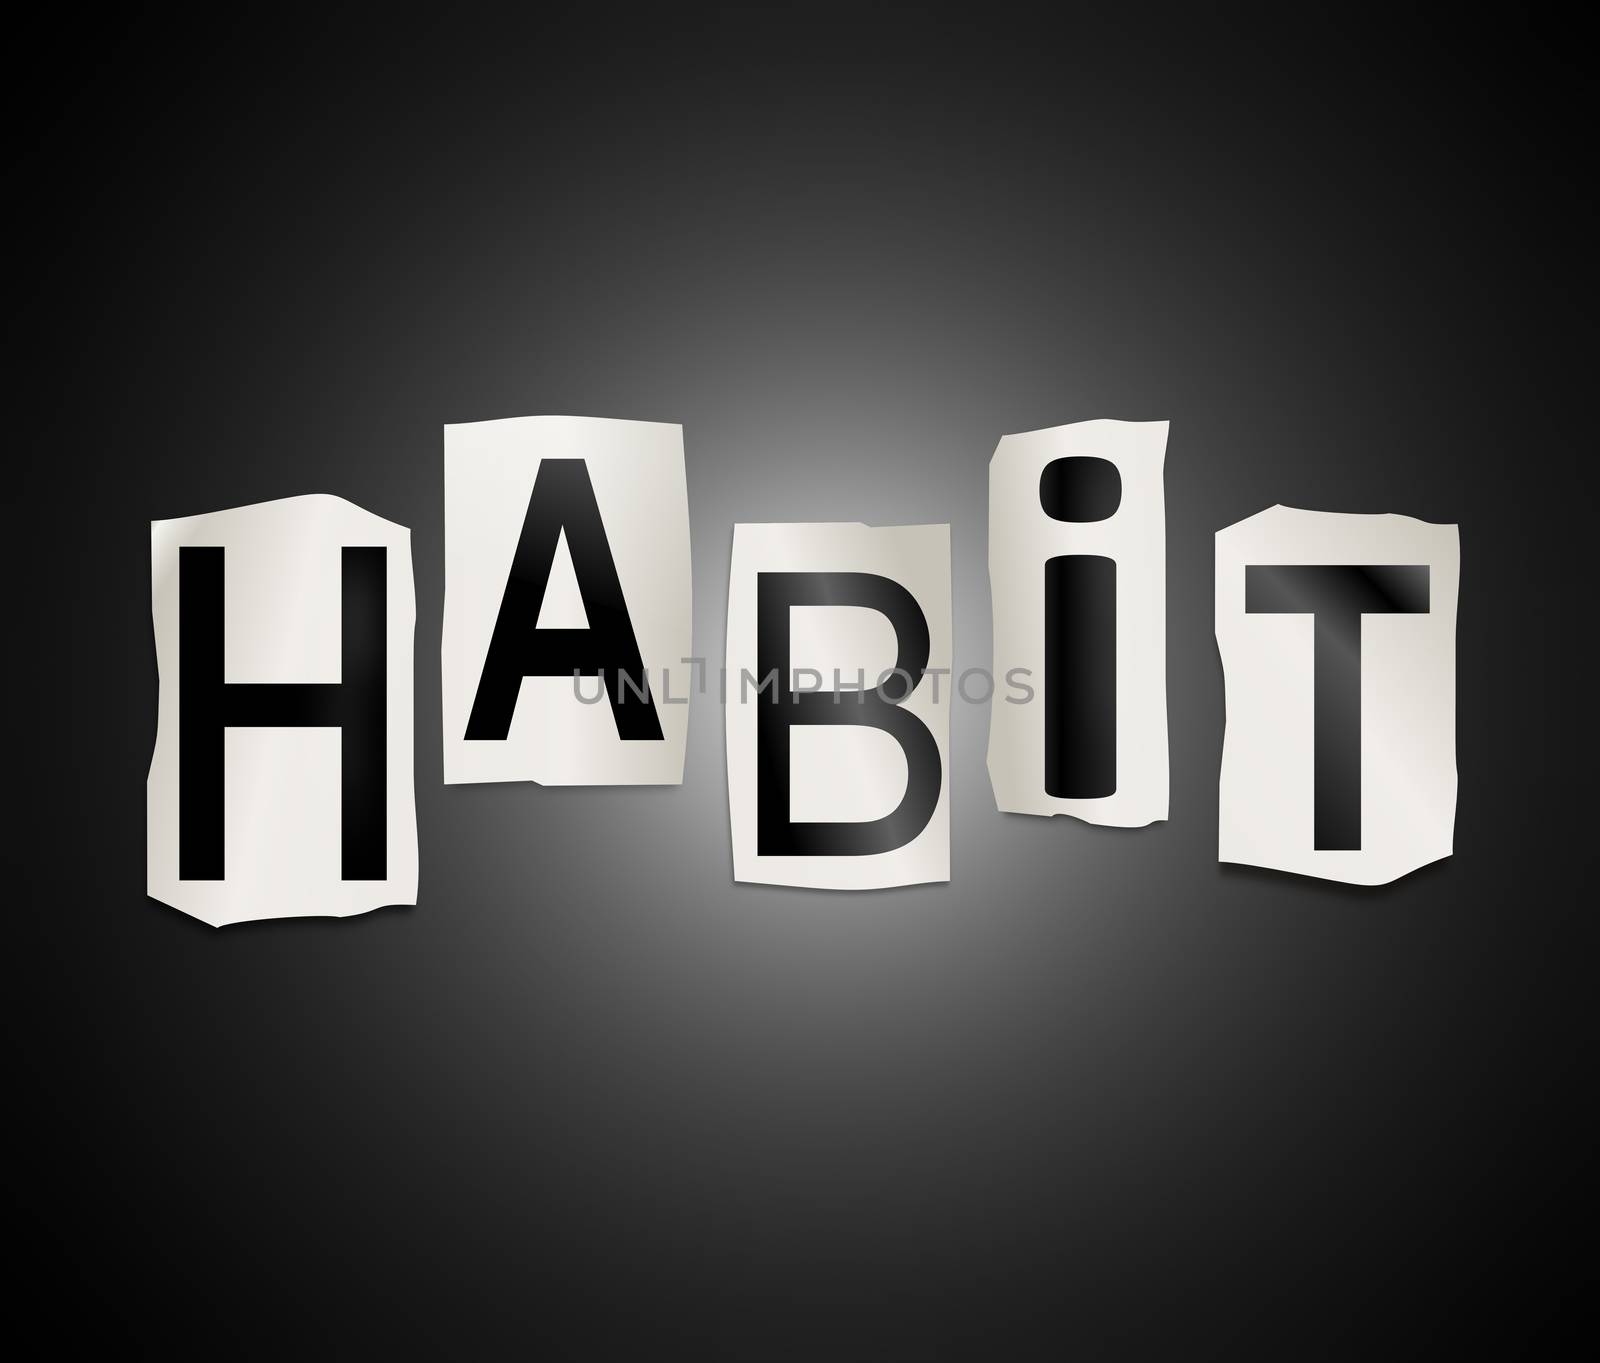 Illustration depicting a set of cut out printed letters arranged to form the word habit.